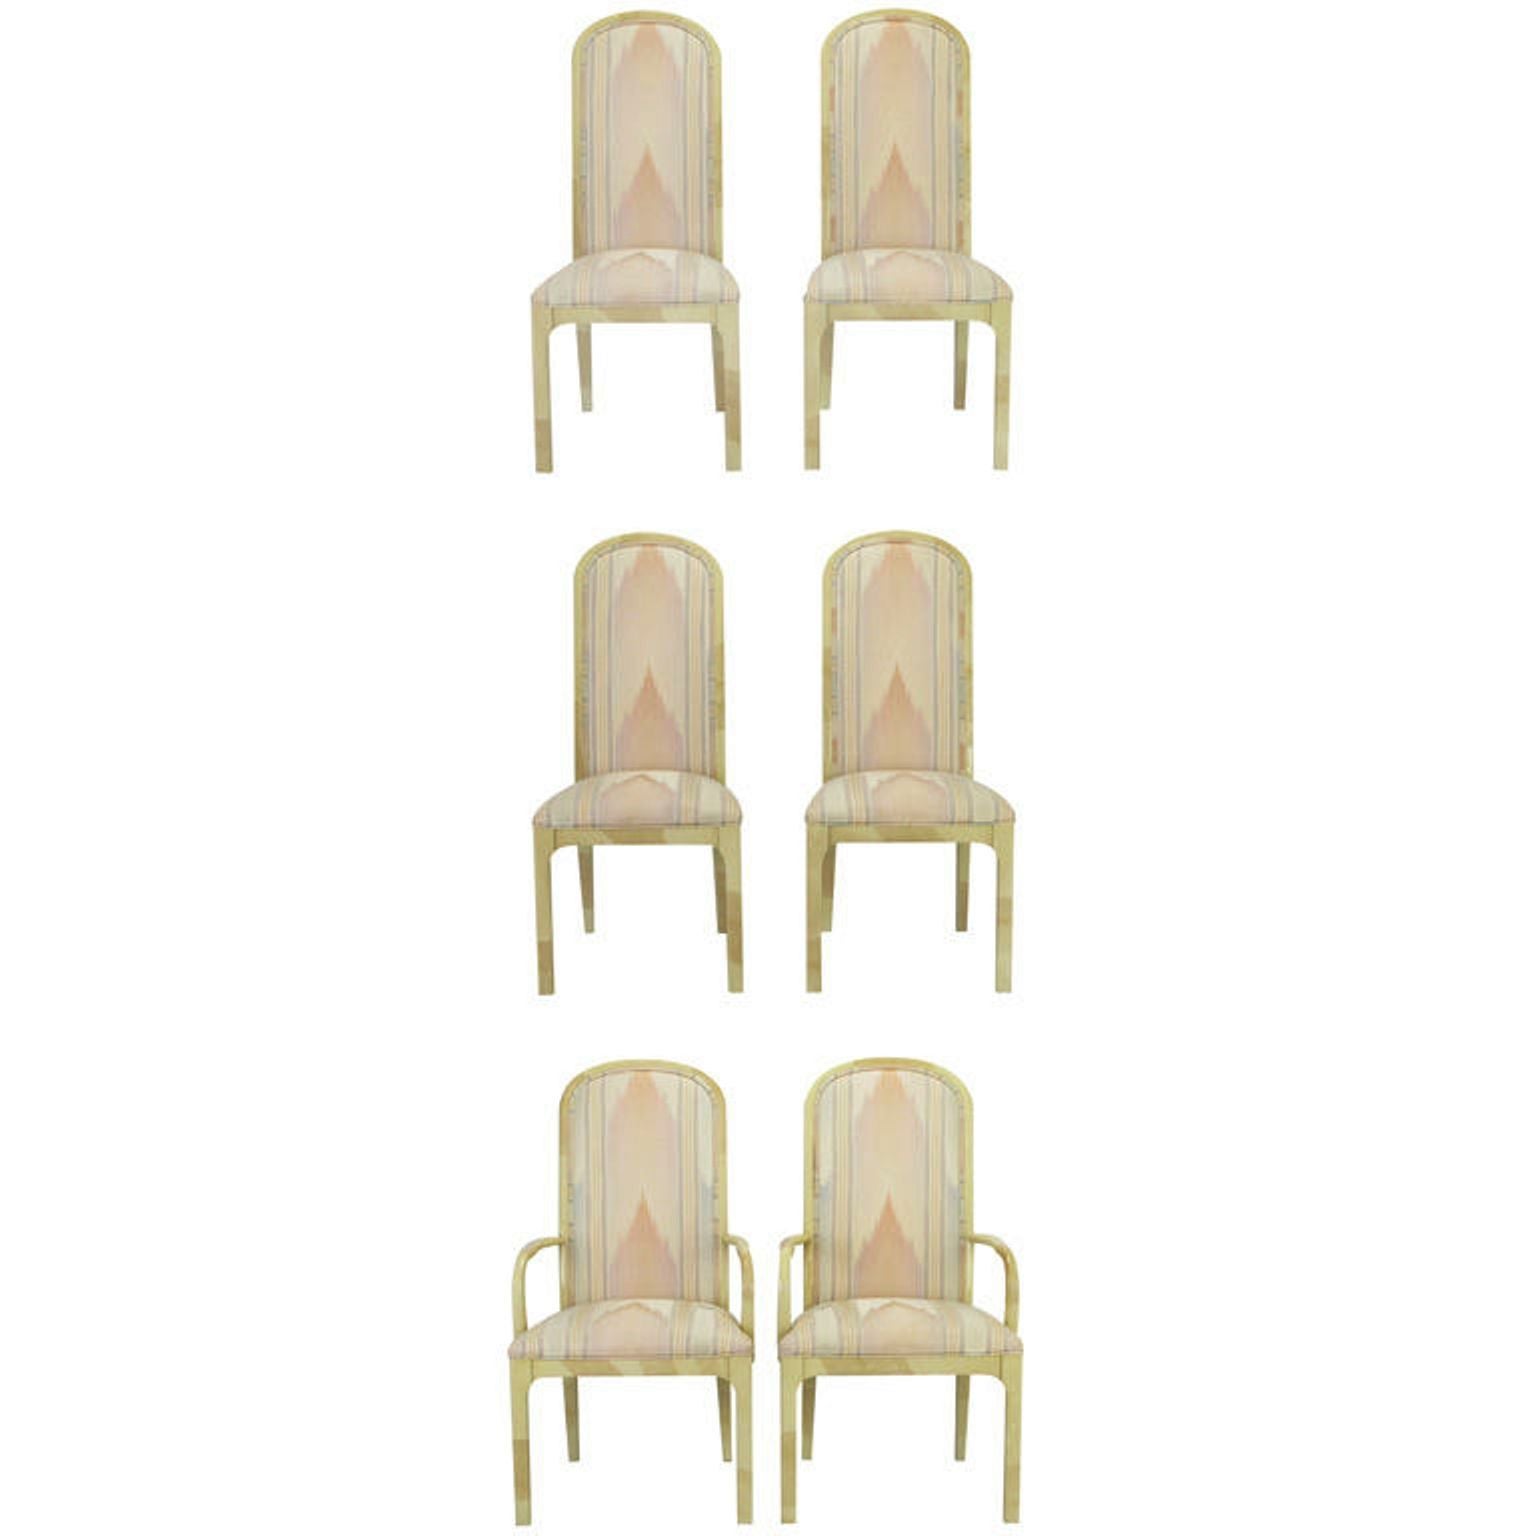 Six Goatskin Lacquer Dining Chairs by Century